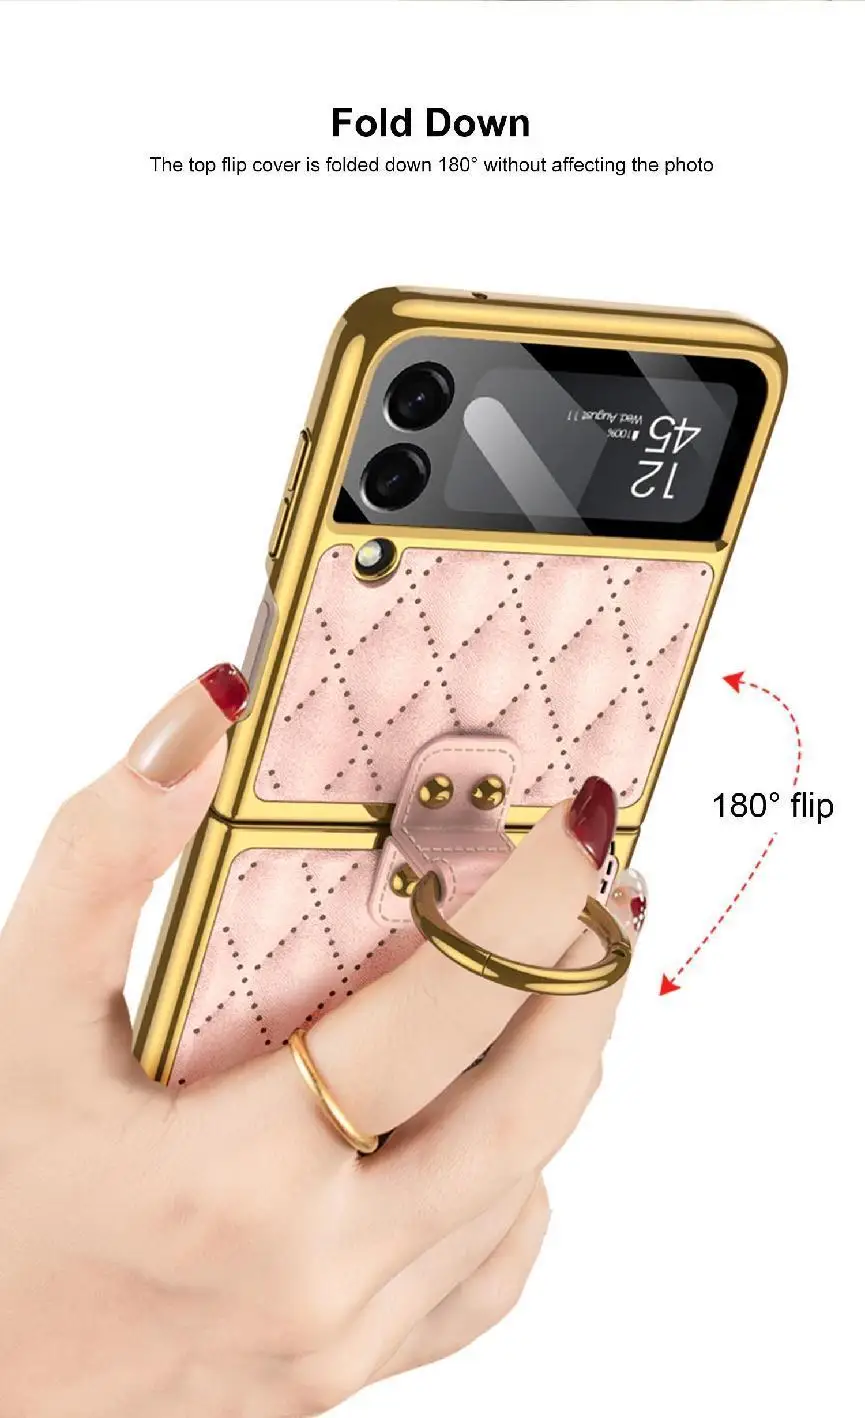 New Ring Holder Case For Samsung Galaxy Z Flip 3 5G Cover Protective Ultra-thin Case With Bracket Holder For Samsung Z Flip3 z flip3 cover